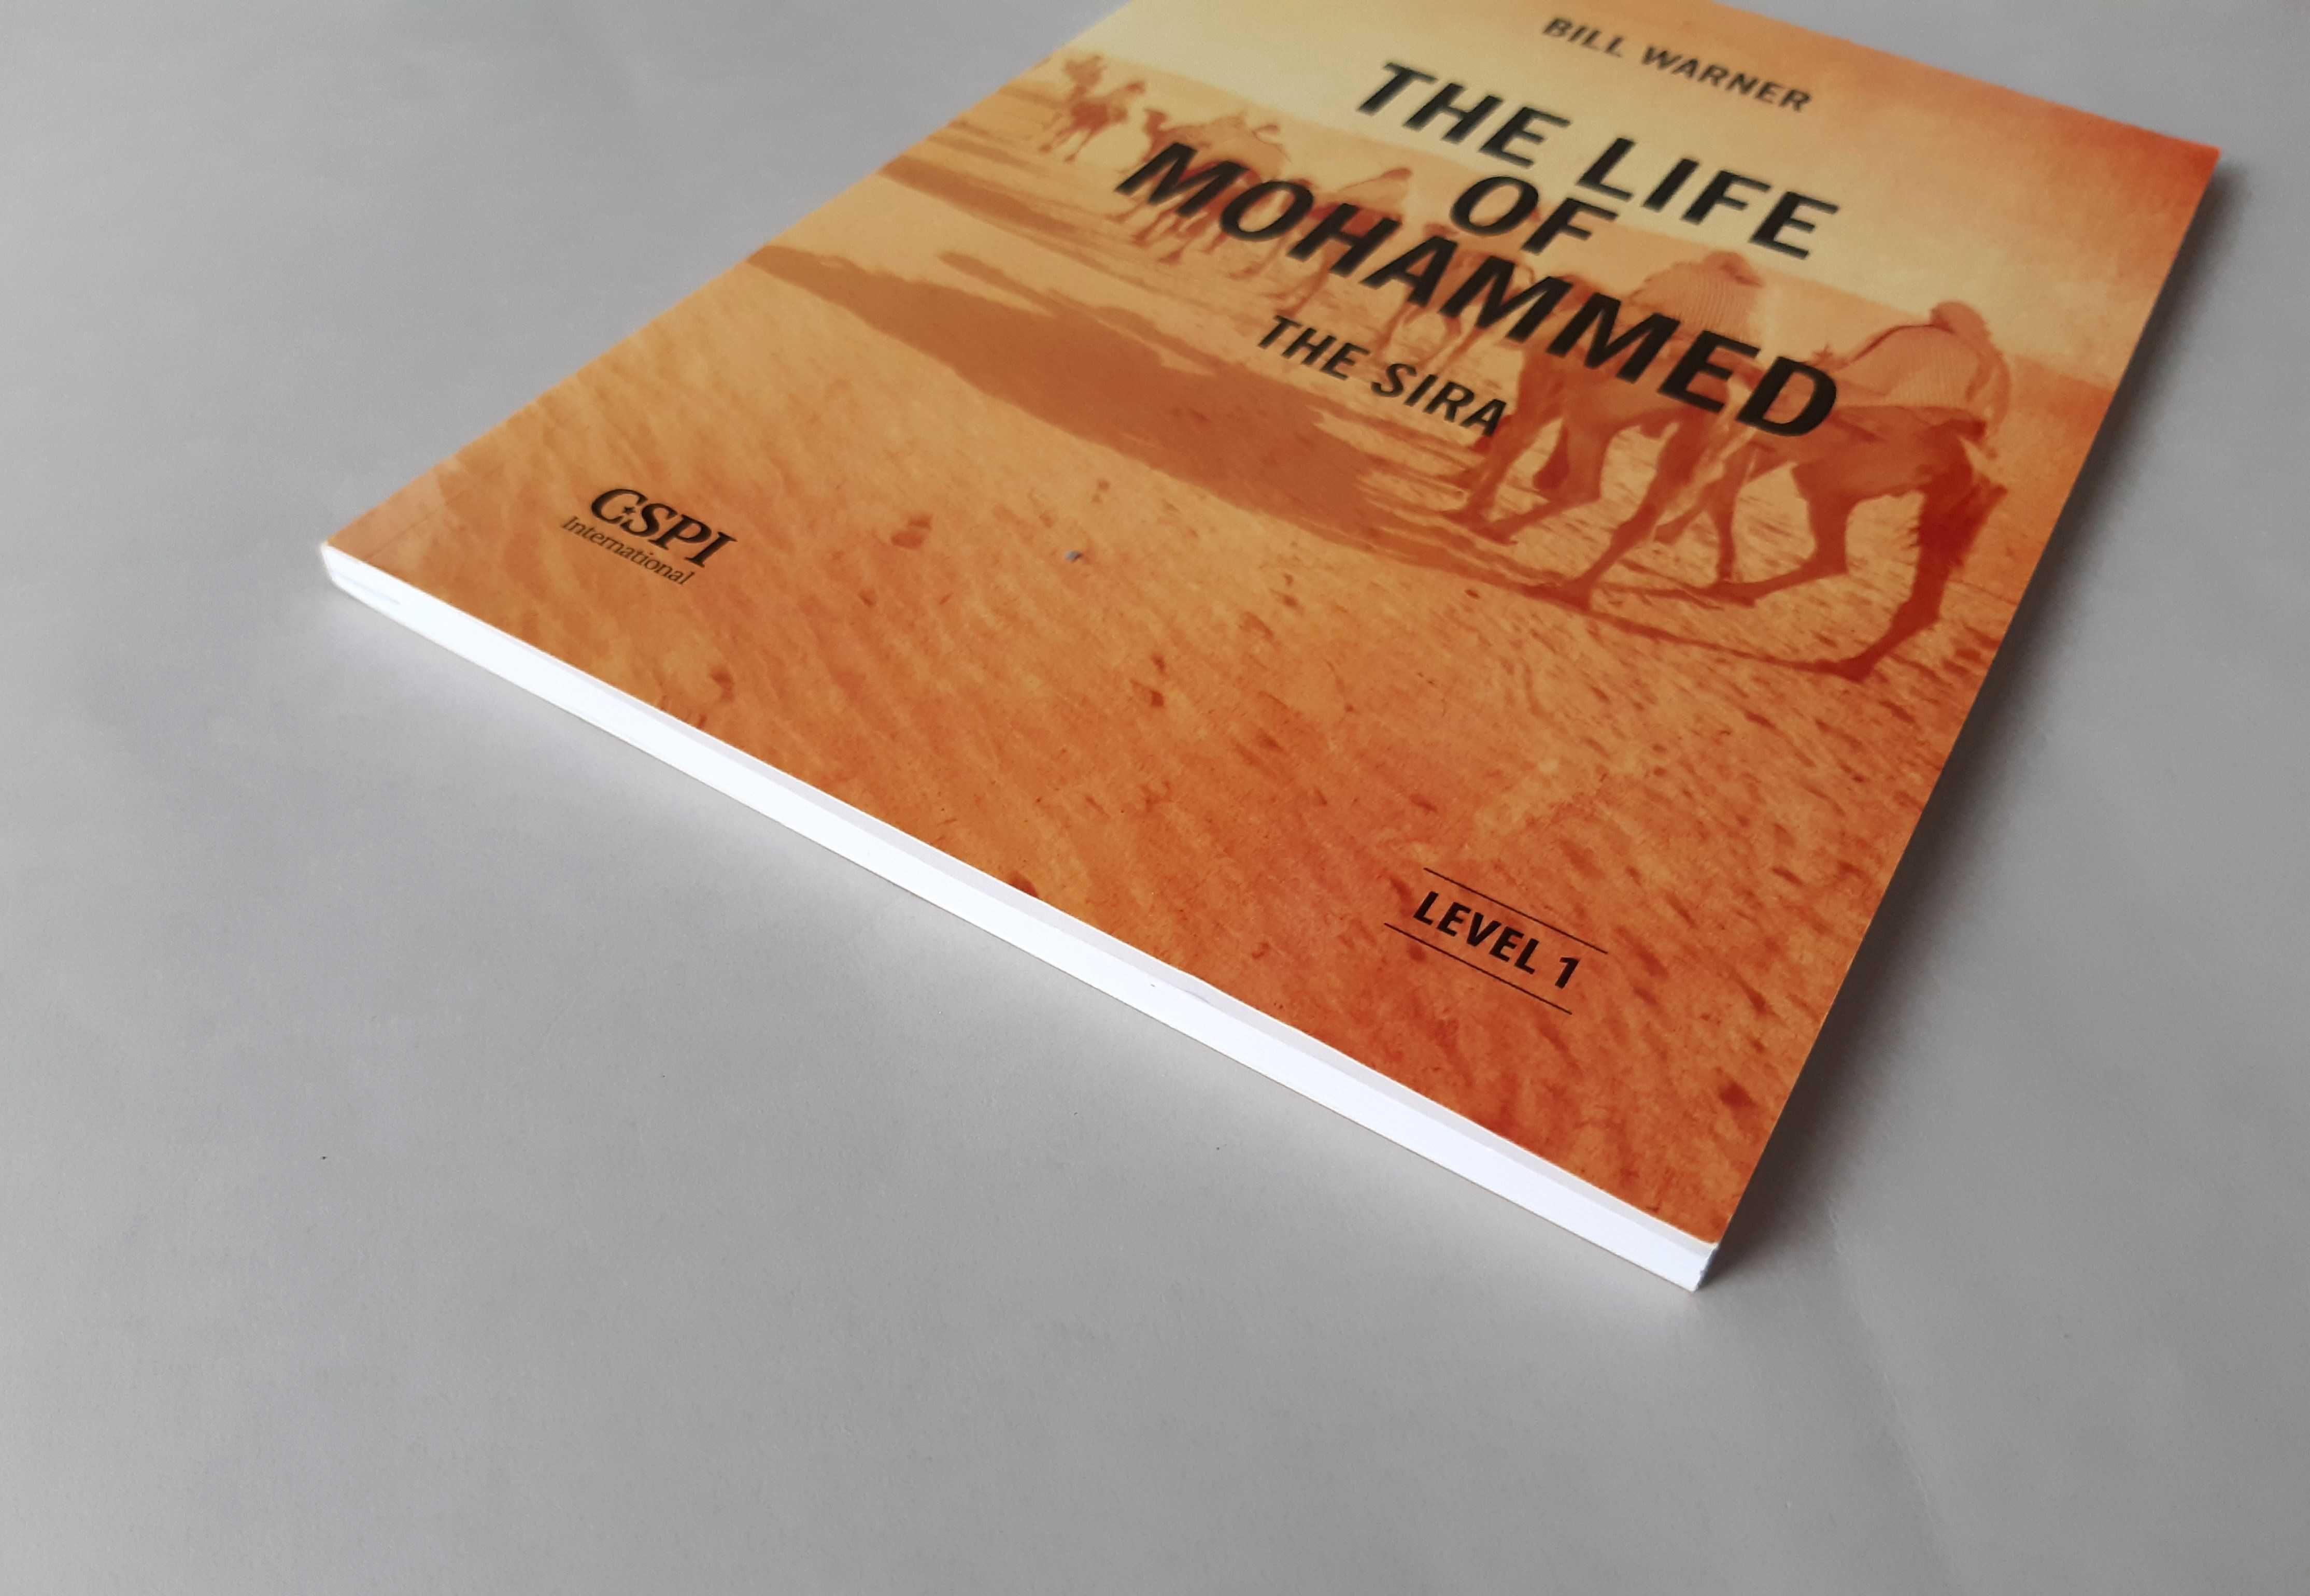 The Life of Mohammed The Sira Bill Warner